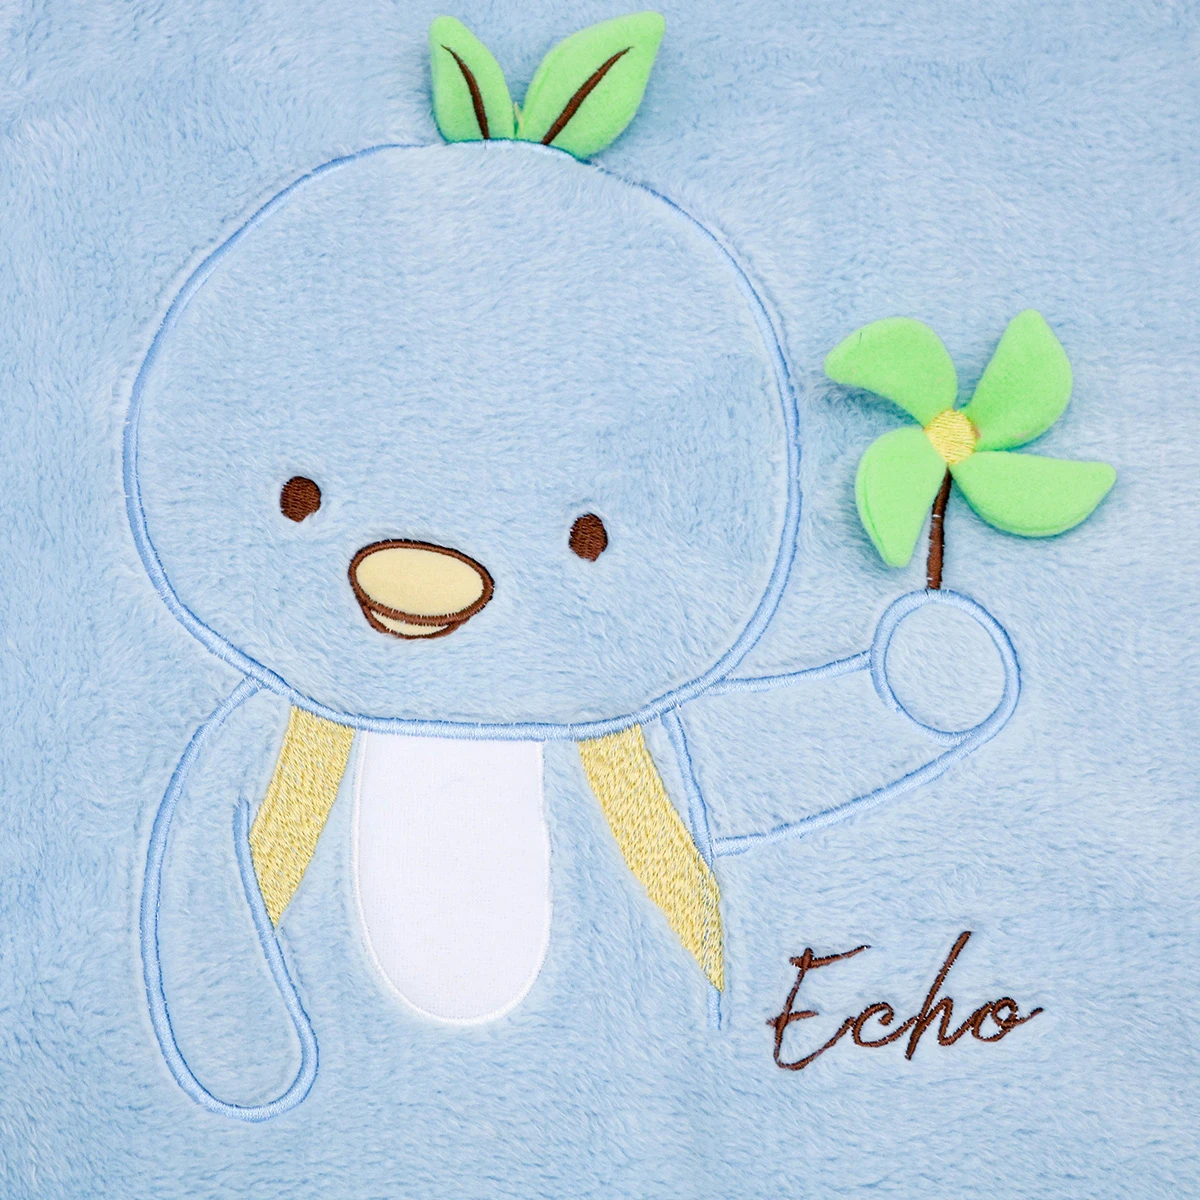 Echo 3D Embroidery Recycled Plush Baby Blanket (Blue)